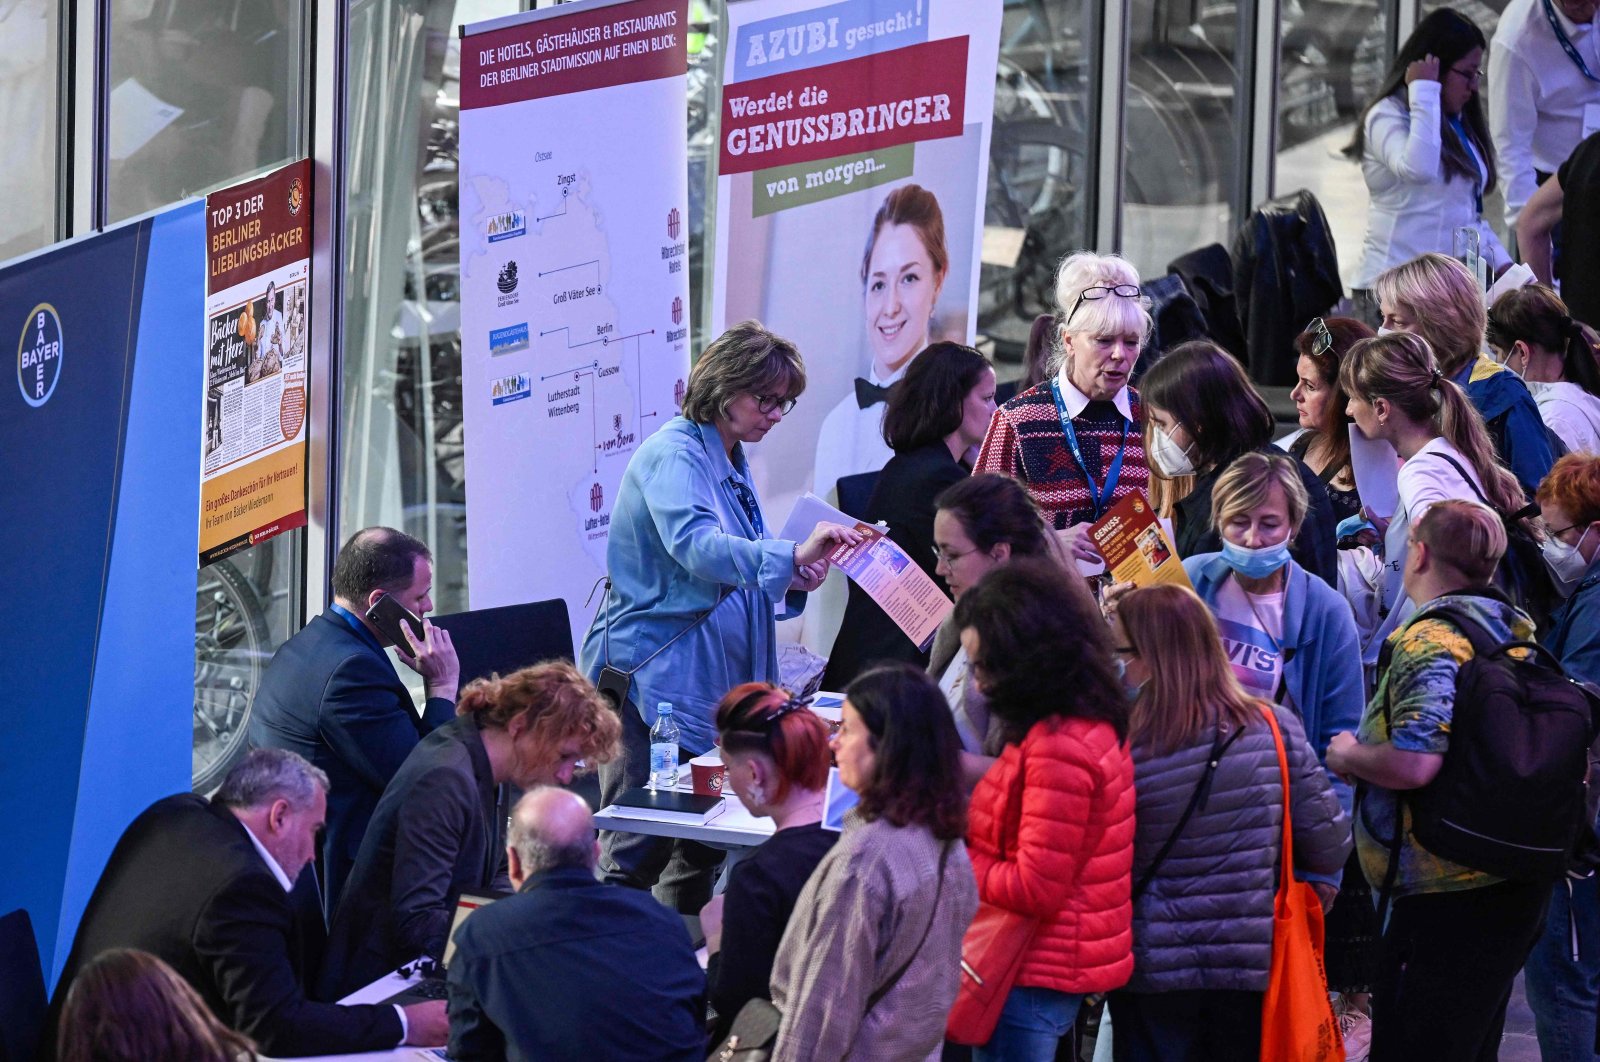 Refugees from Ukraine line up for information at a booth at a job fair in Berlin, Germany, June 2, 2022. (AFP Photo)